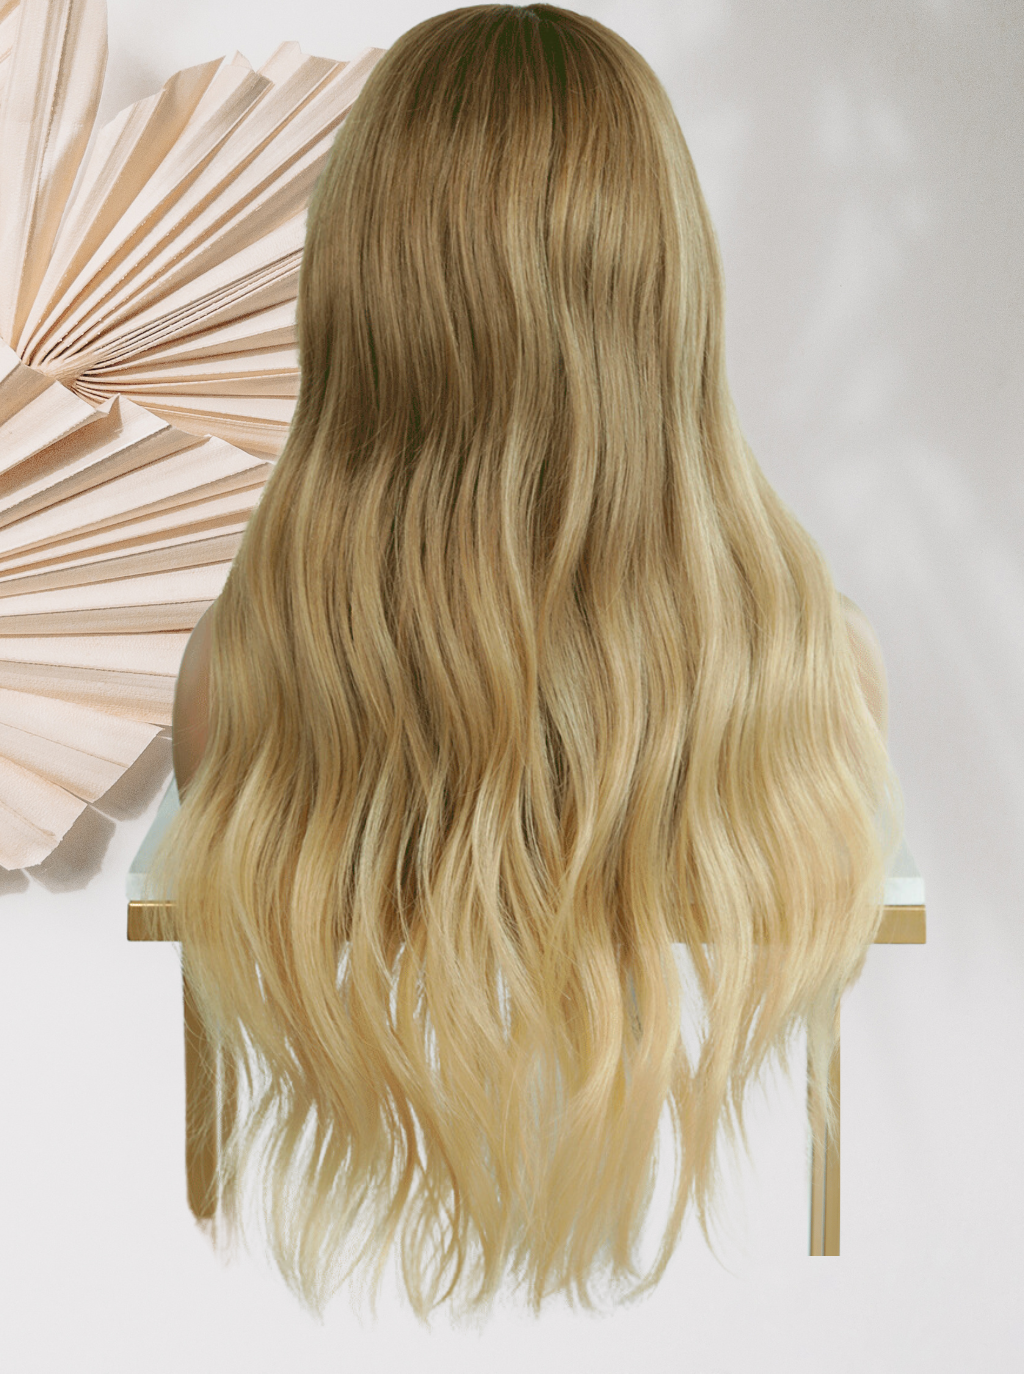 Starr lace wig